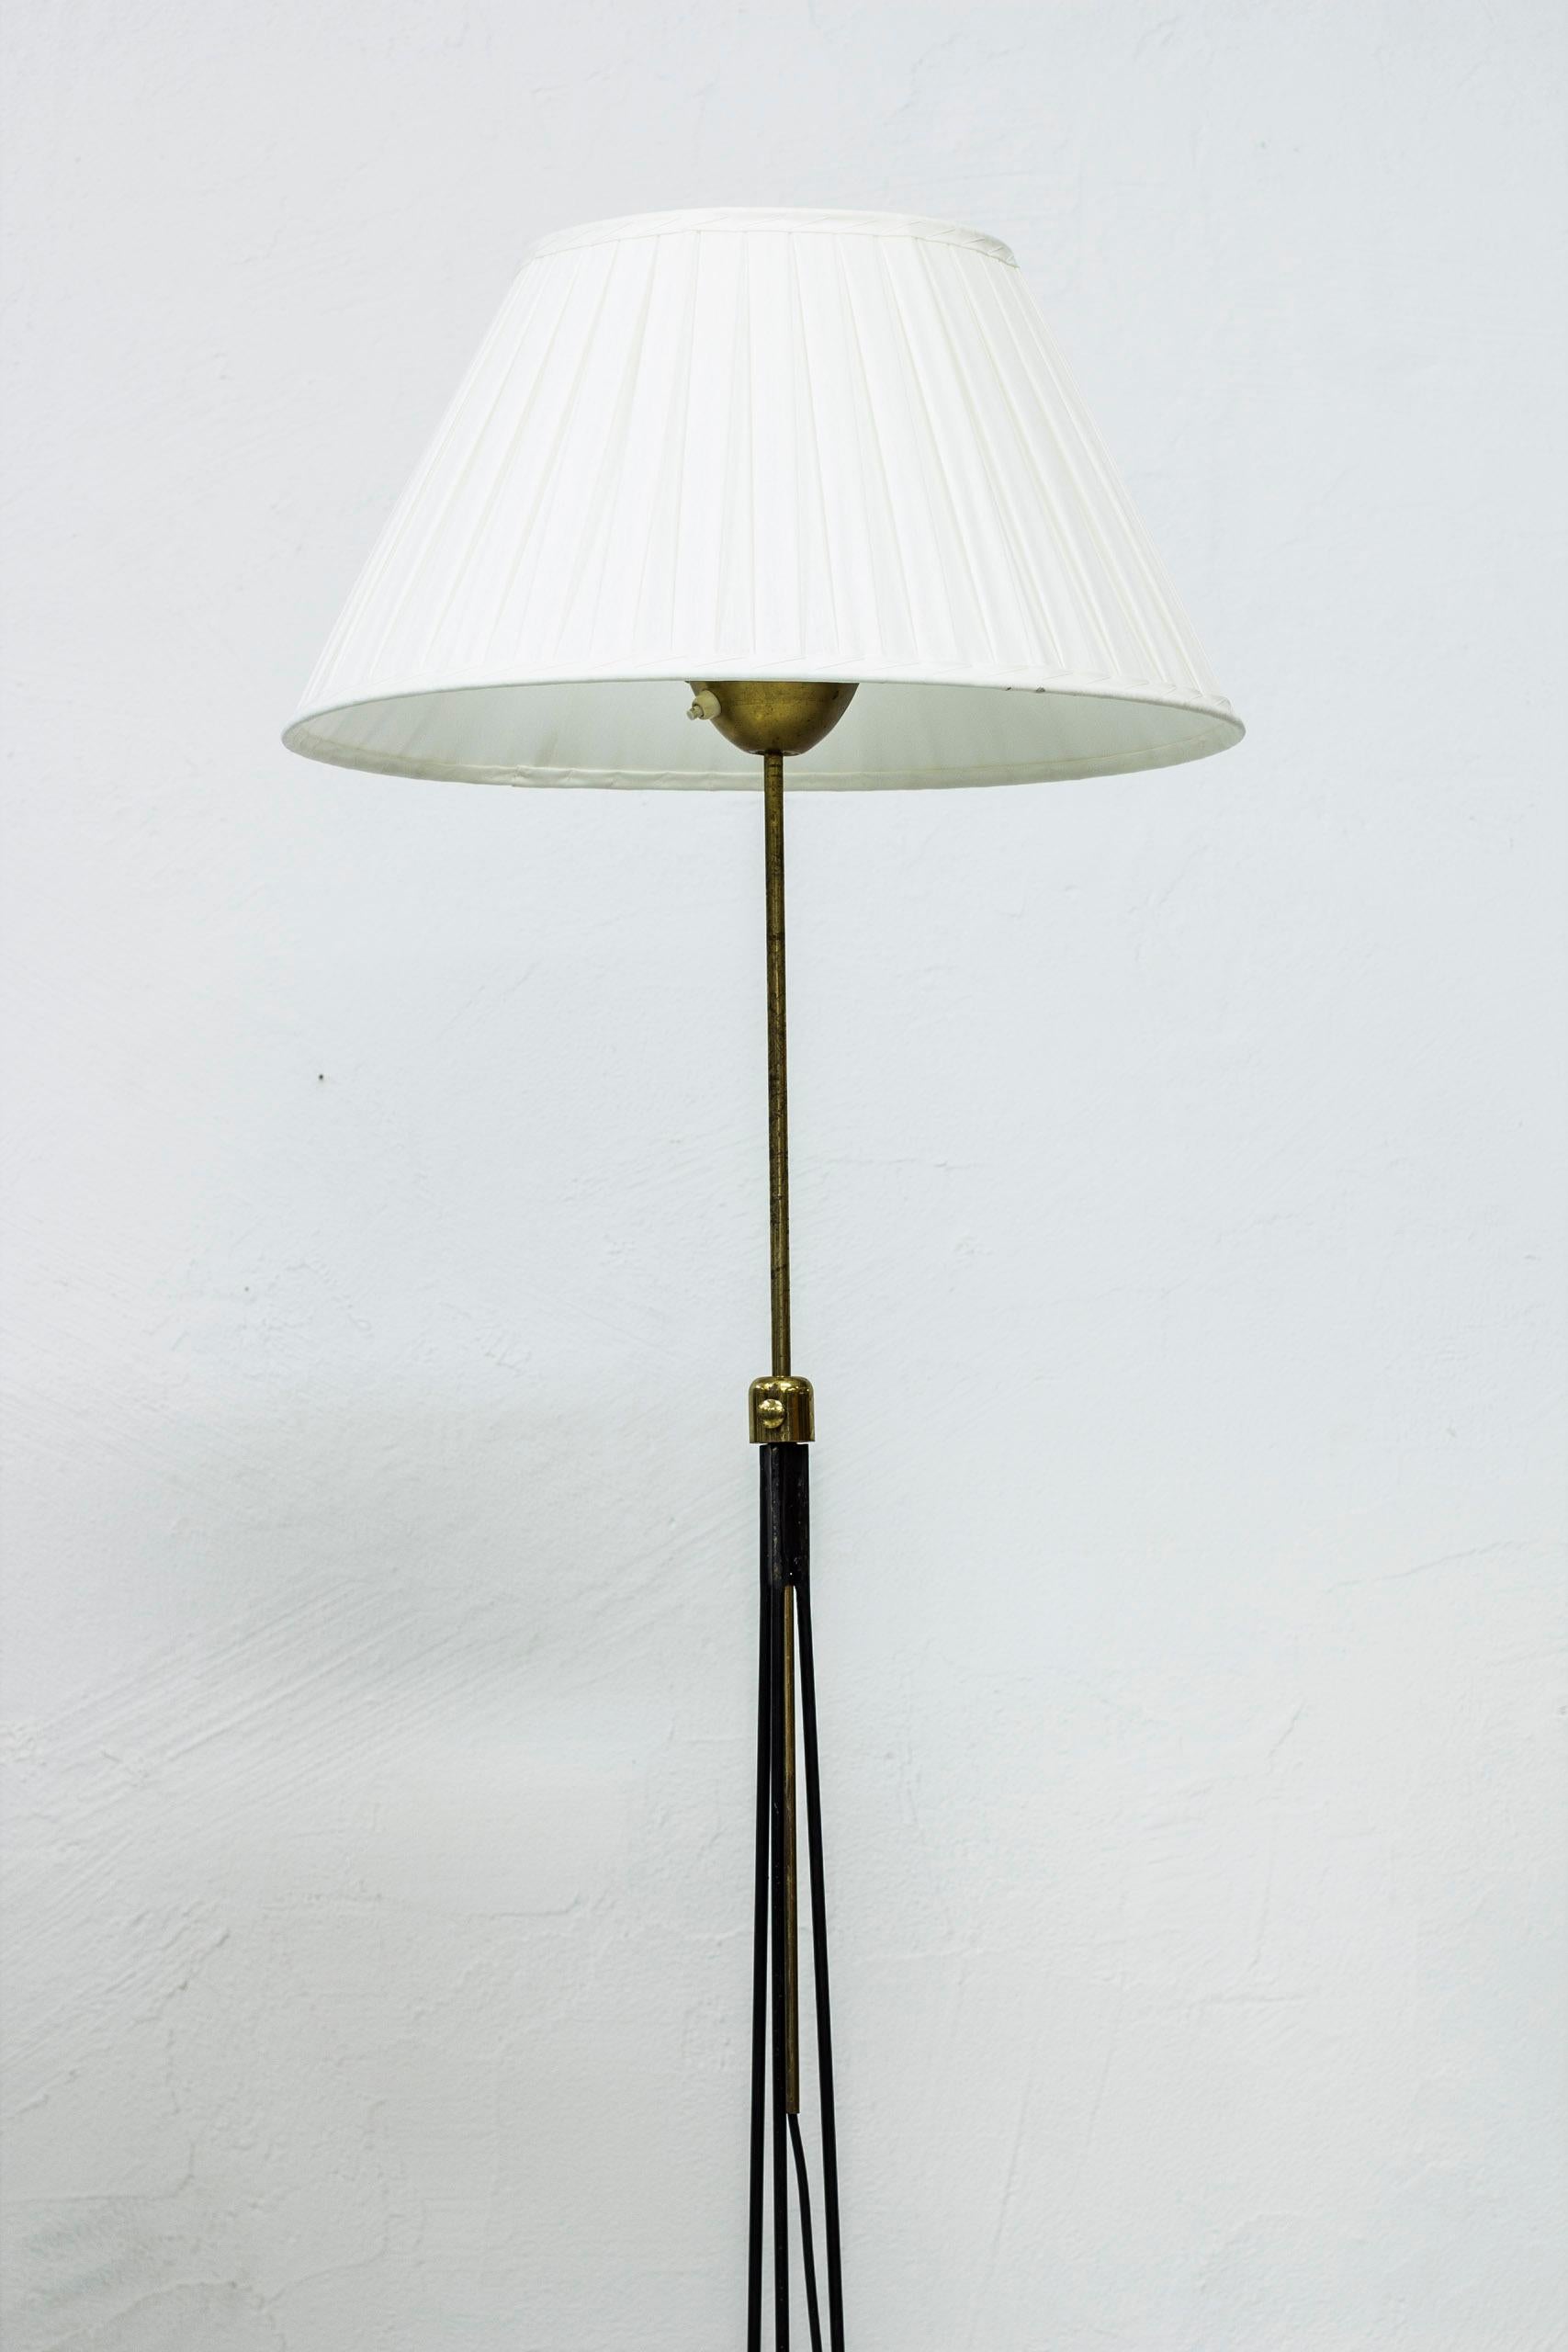 Mid-20th Century Floor Lamp by Nils Strinning for String Design, Sweden, 1950s